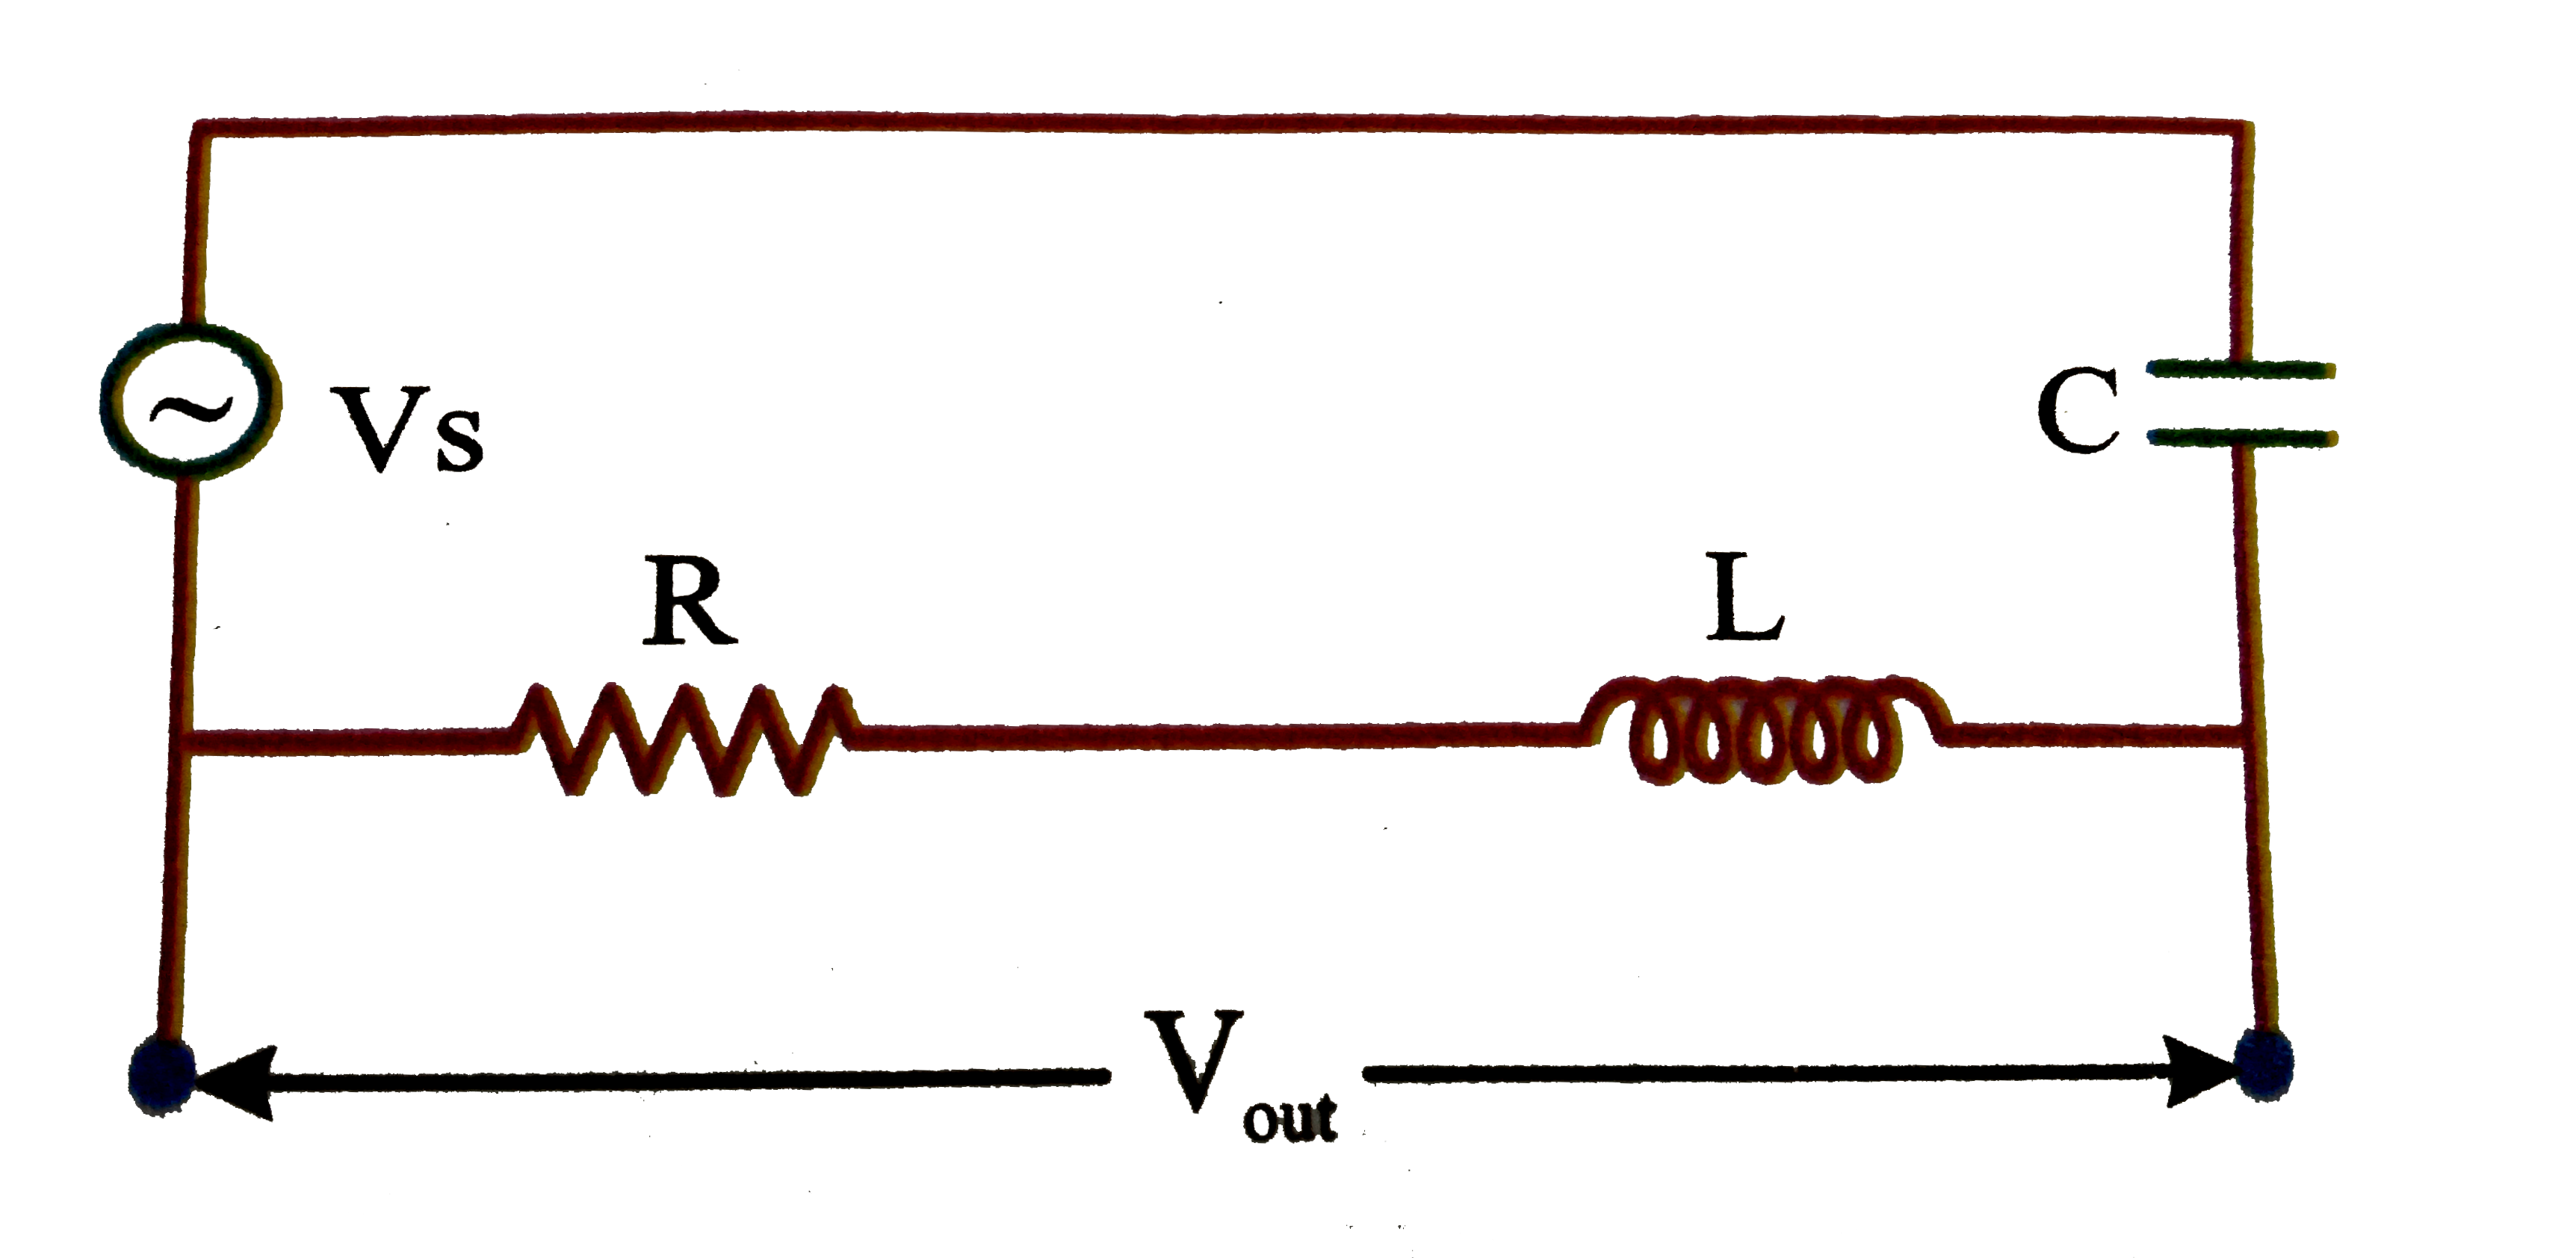 One application of L-R-C series circuit is in high pass or low pass filter, which out either the low or high frequency components of a signal. A has pass filter is shown in figure where the output voltage is taken across the L-R where L-R combination represents and inductive coil that also has resistance due to the large length of the wire in the coil.       Which statement is correct in the limit of large frequency is reached? (for V(